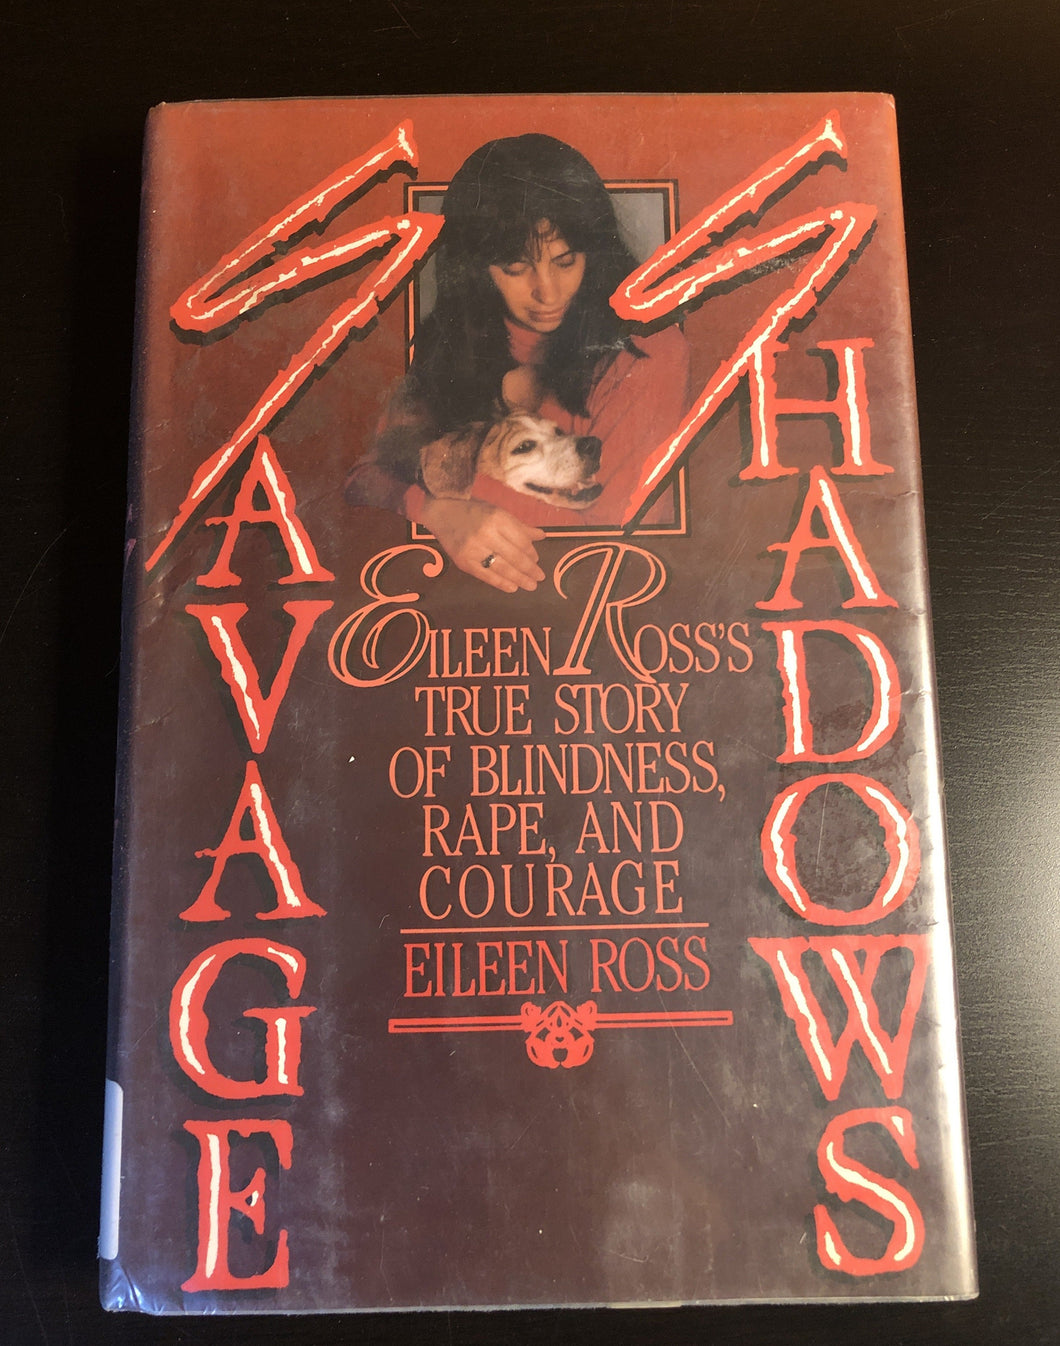 Savage Shadows: Eileen Ross's True Story of Blindness, Rape, and Courage